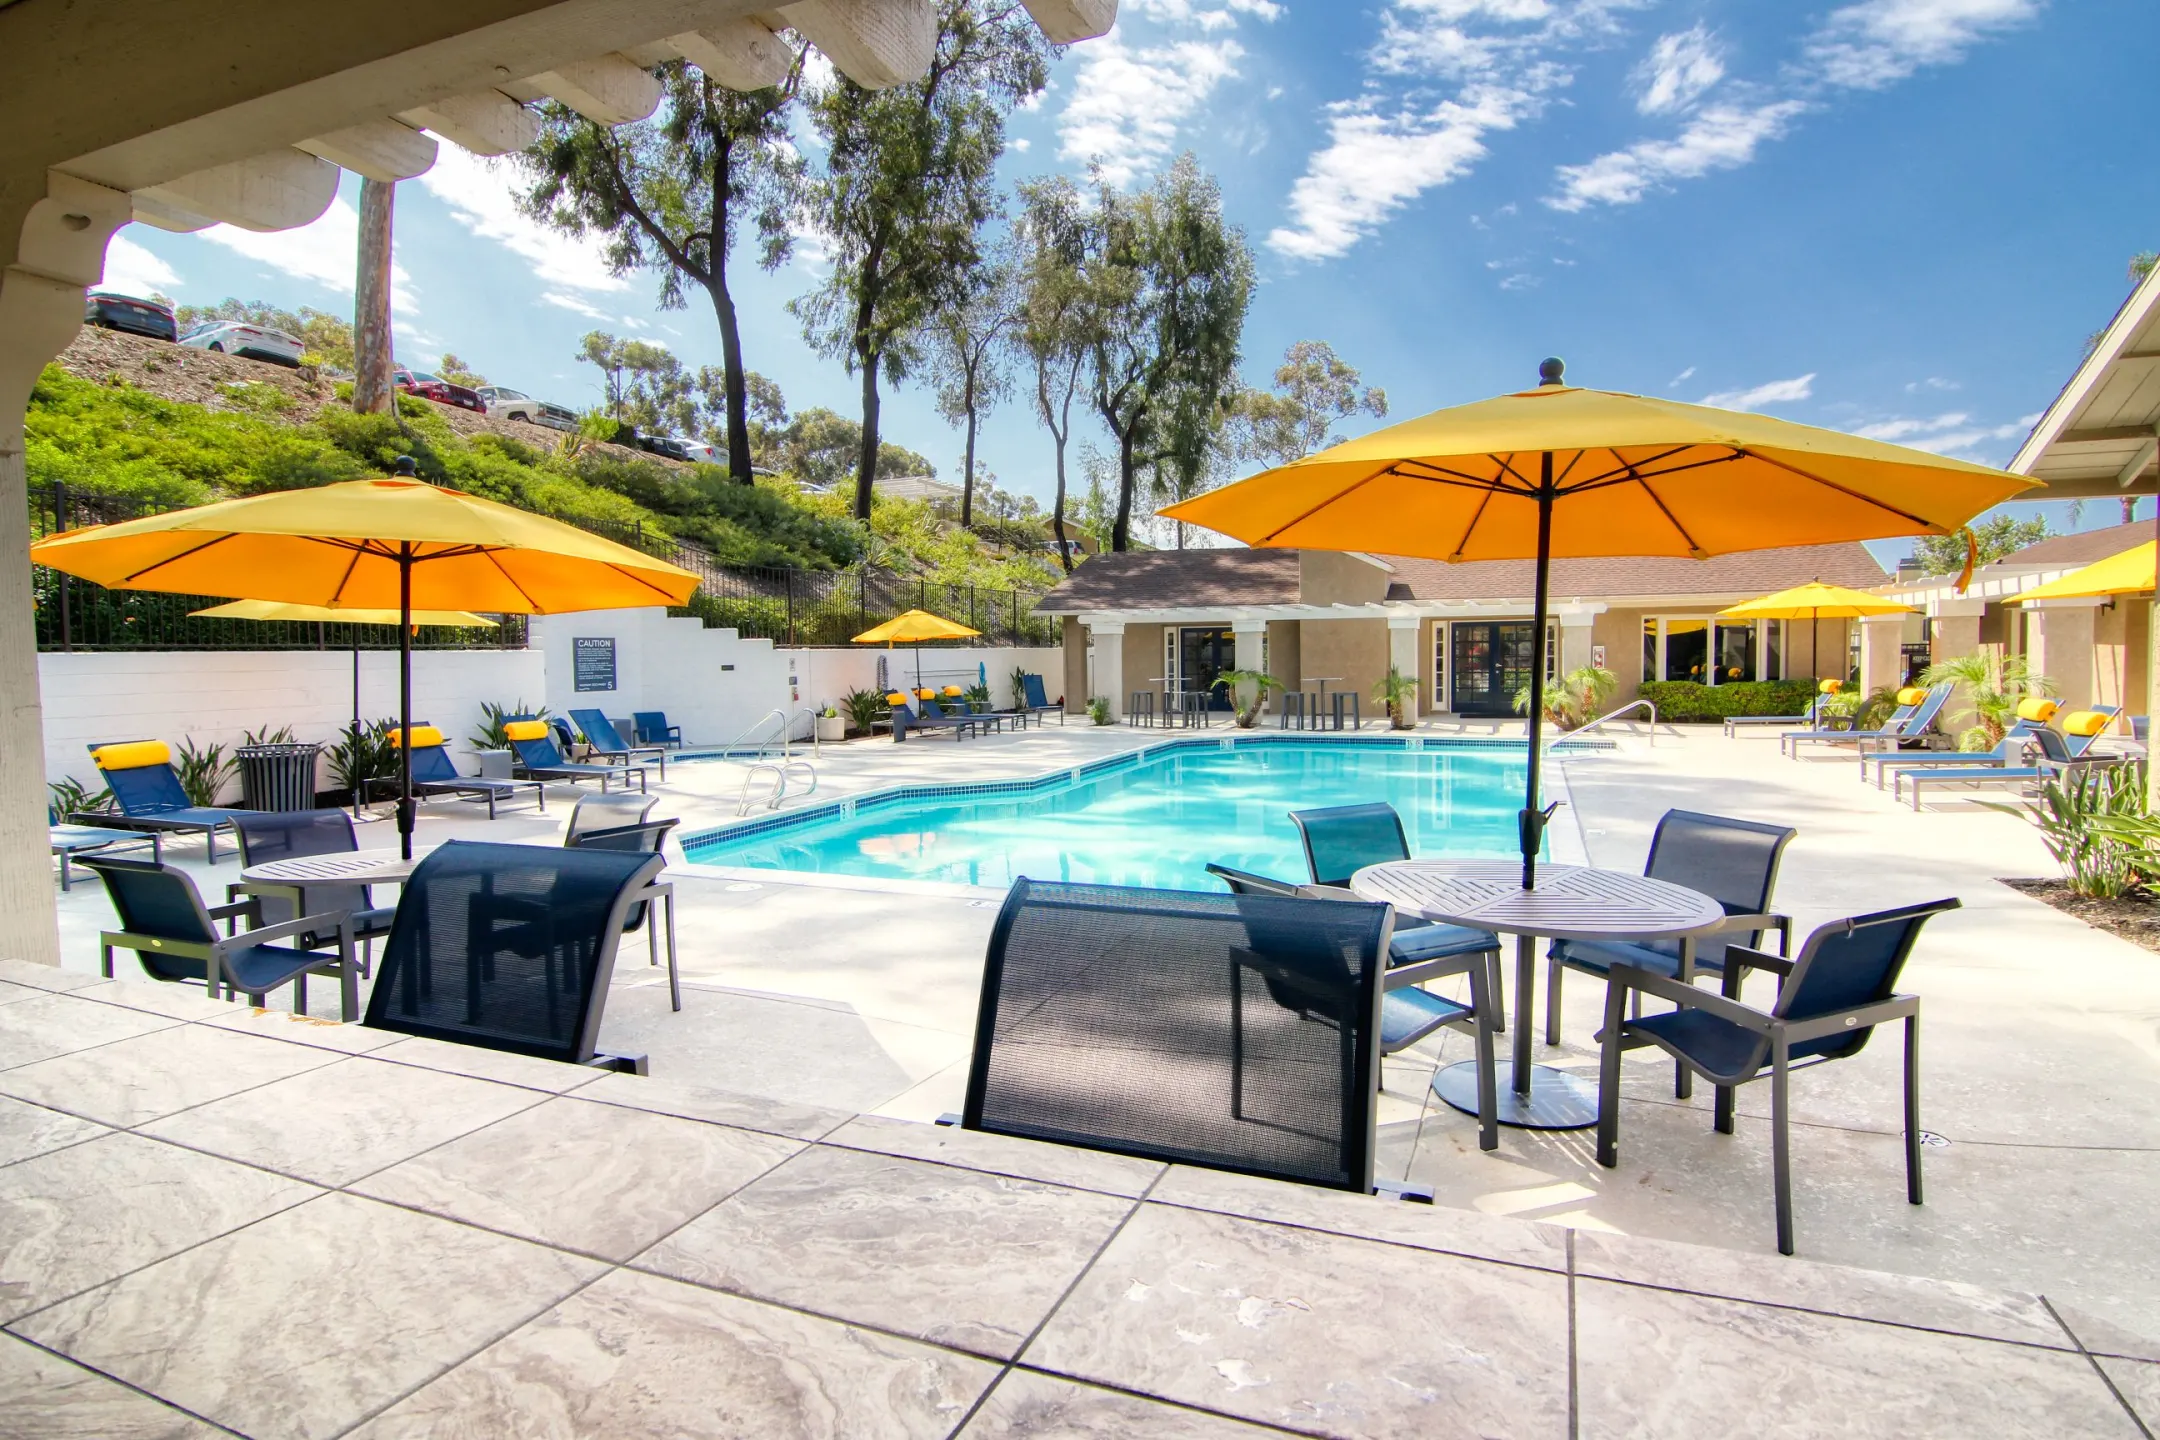 Pool - Lakeview Village - Spring Valley, CA